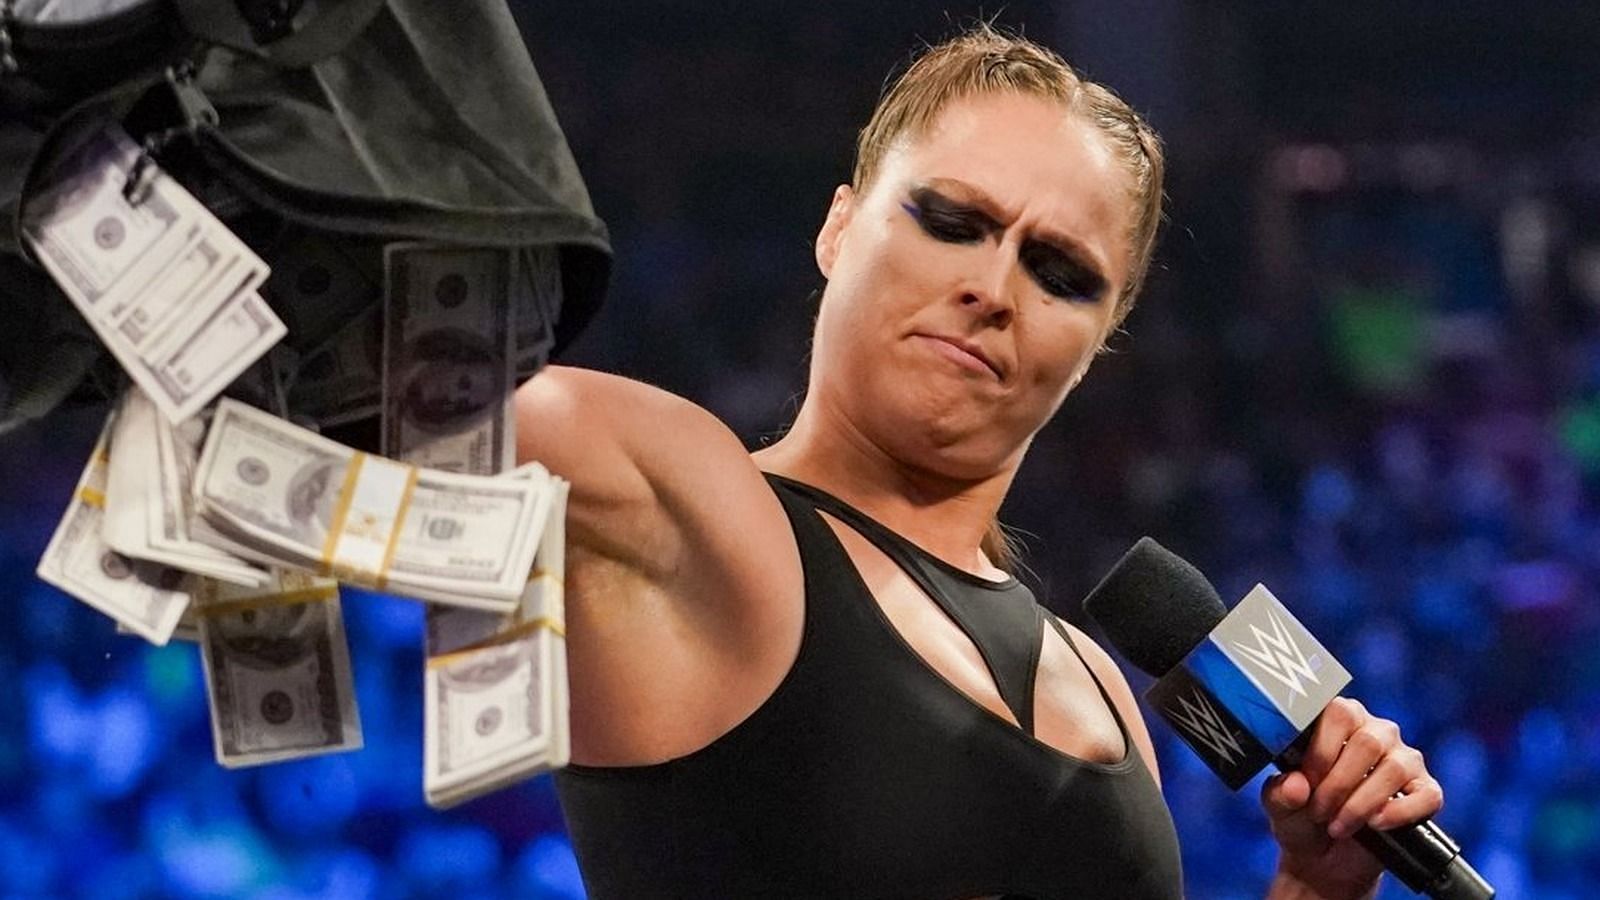 Ronda Rousey was recently suspended and fined by WWE